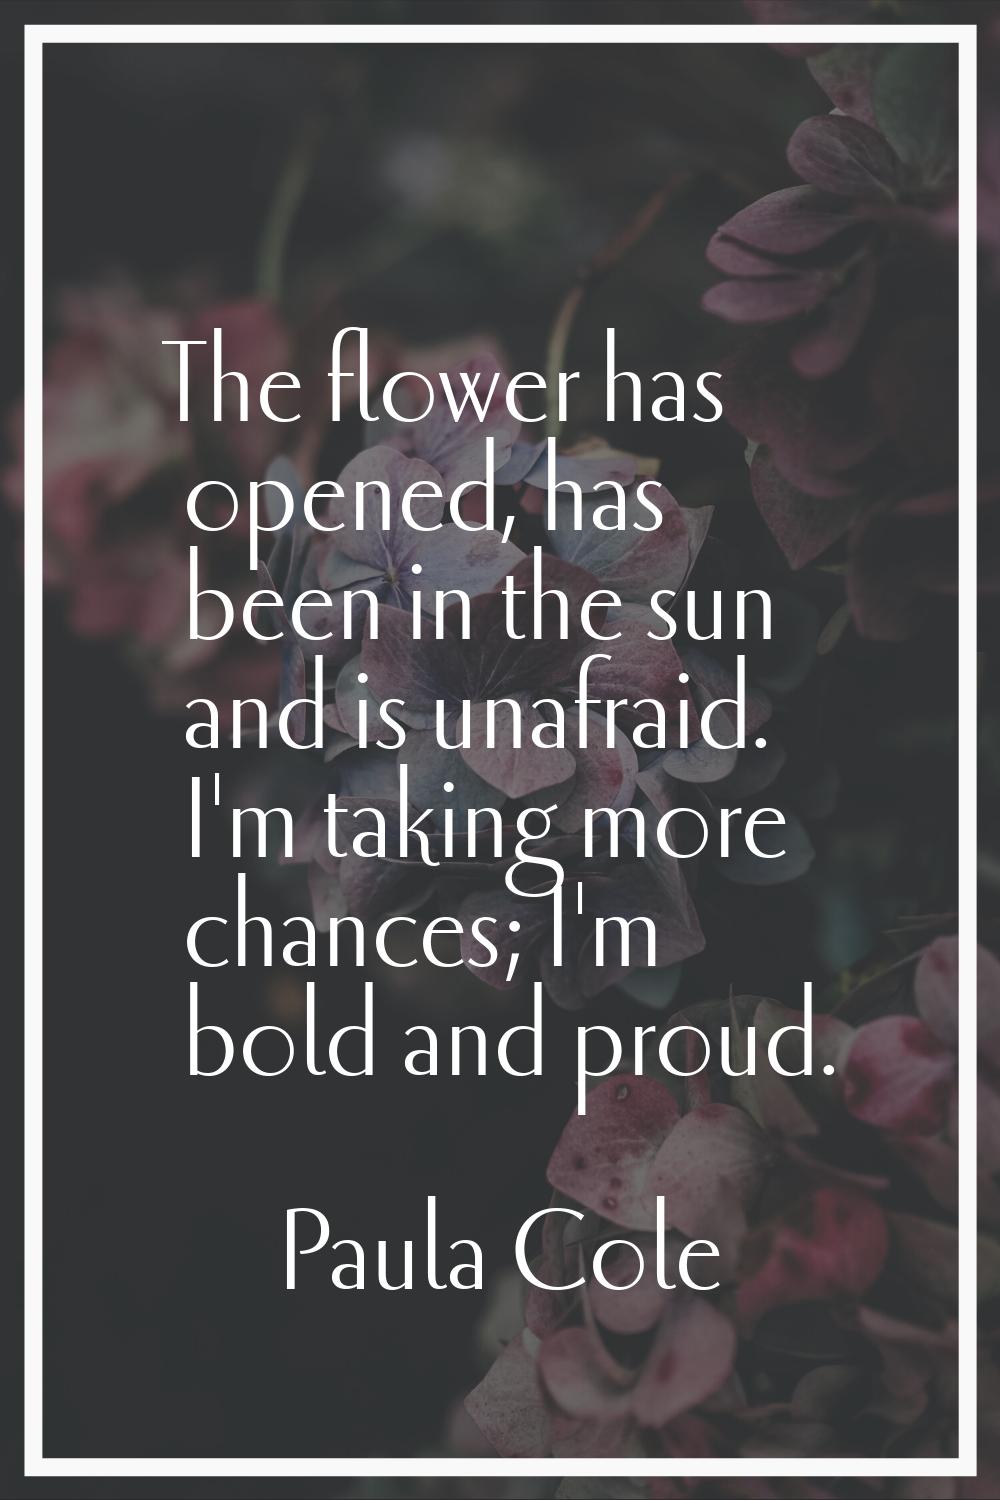 The flower has opened, has been in the sun and is unafraid. I'm taking more chances; I'm bold and p